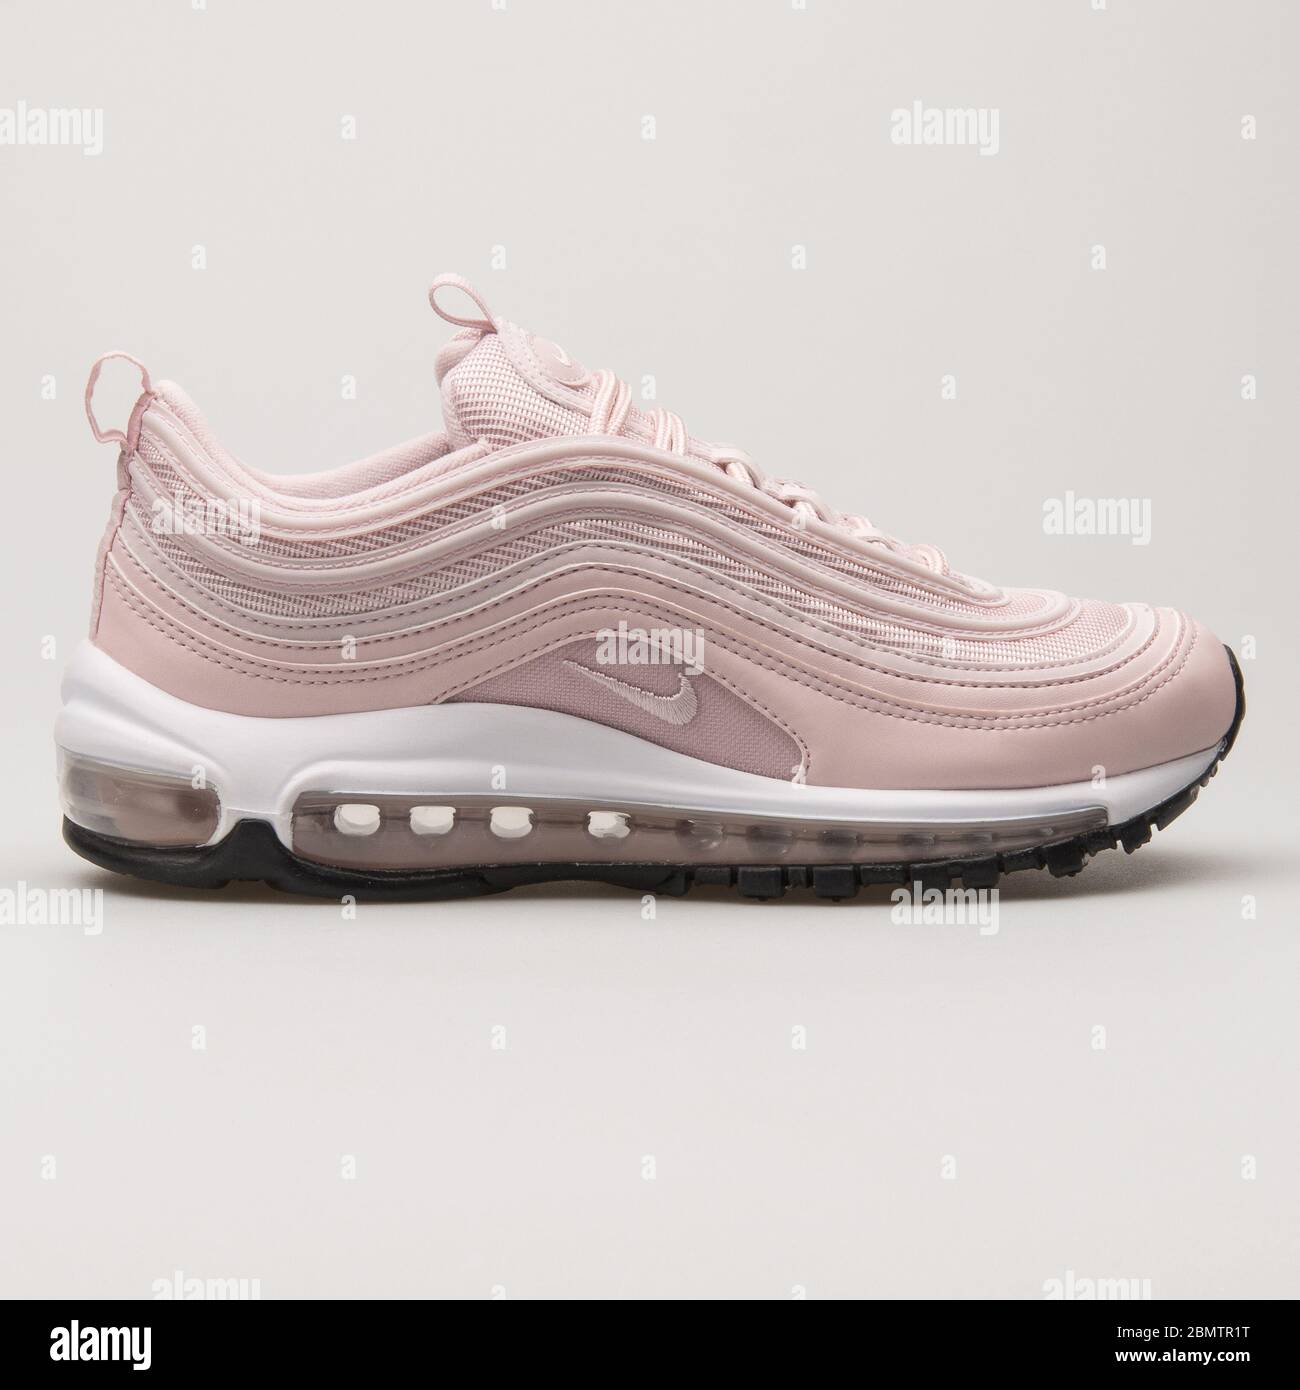 VIENNA, AUSTRIA - MAY 27, 2018: Nike Air Max 97 rose and white sneaker on  white background Stock Photo - Alamy